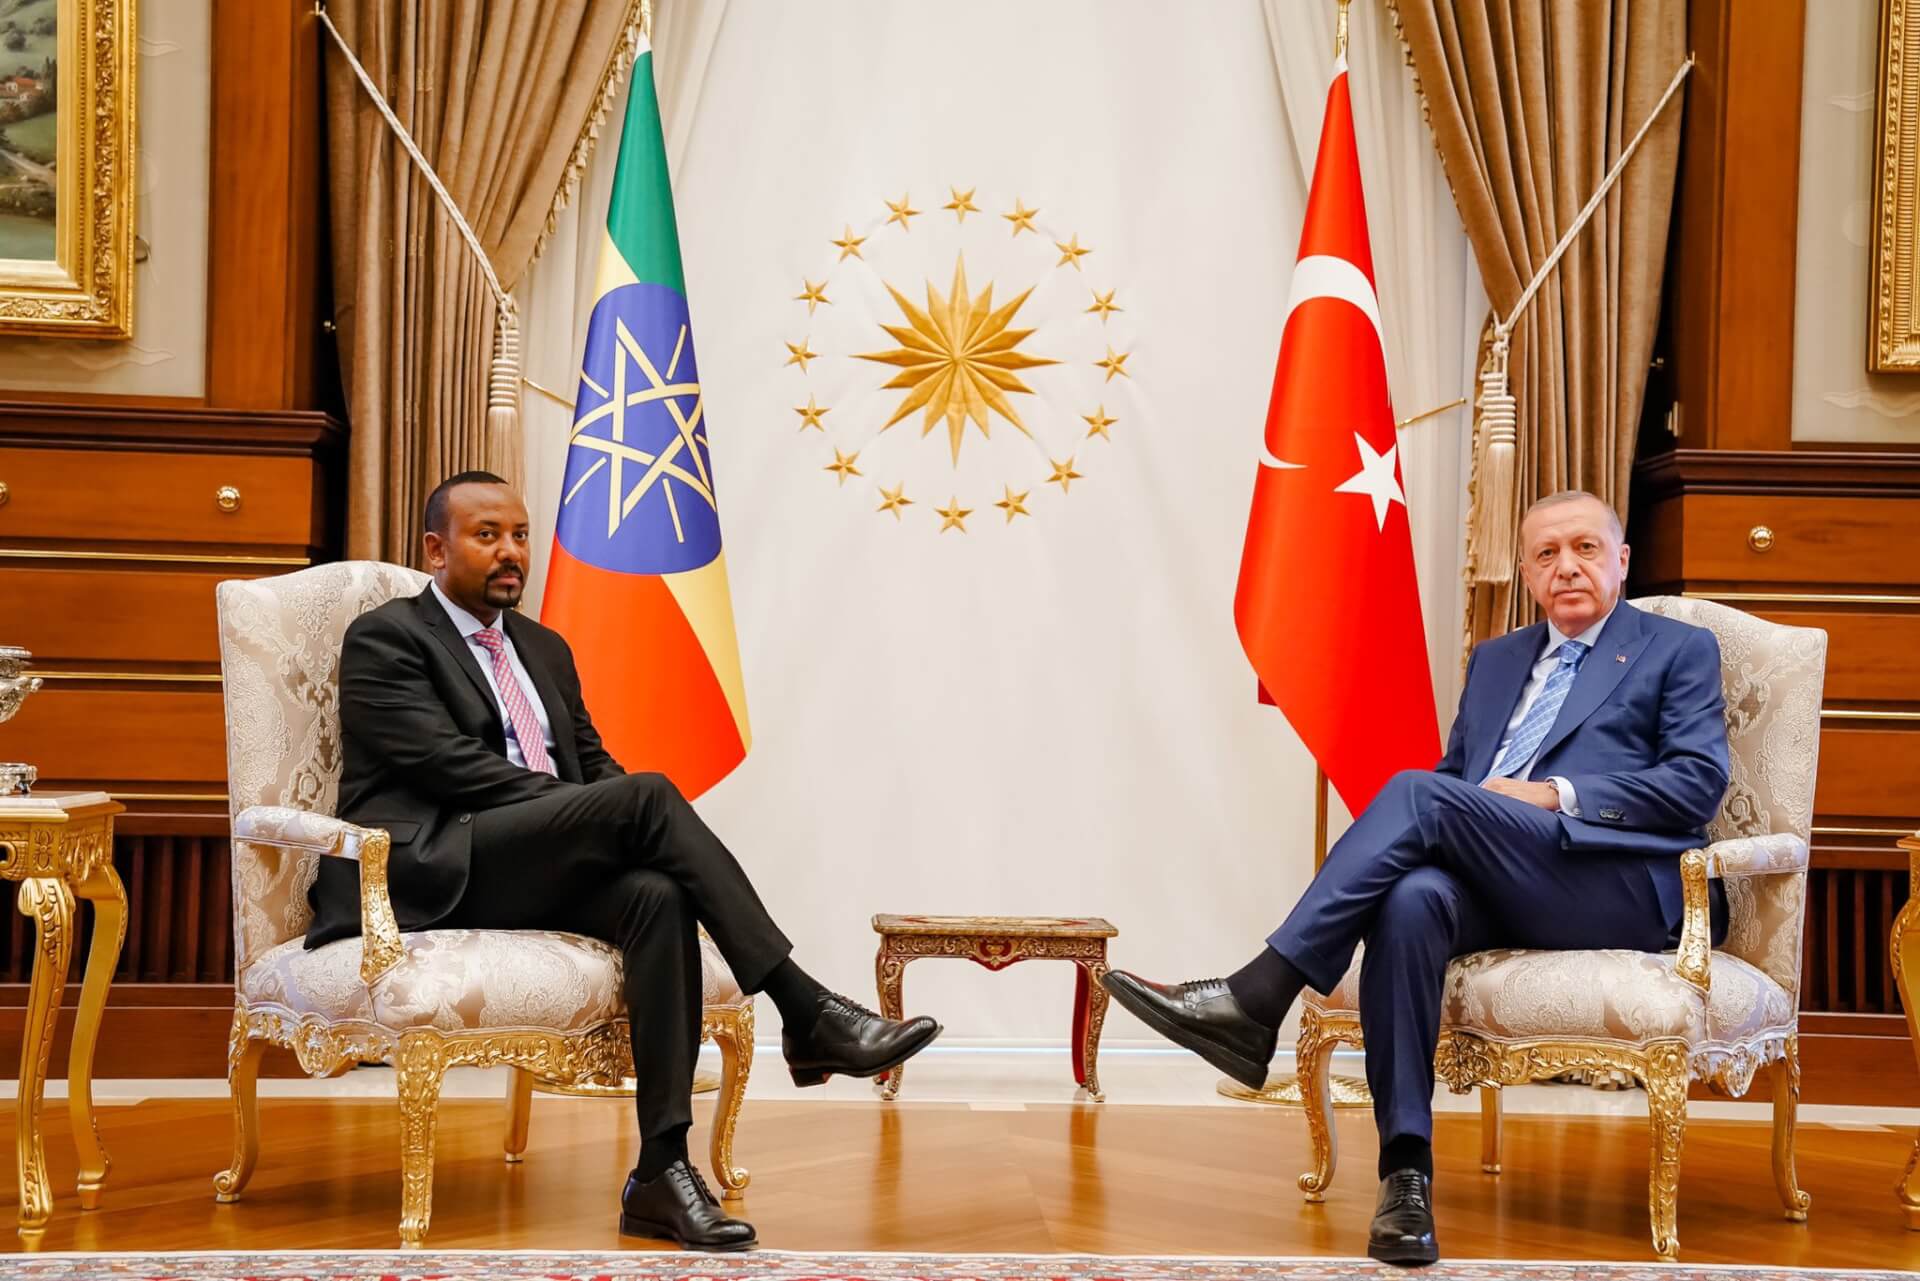 Turkey Backs Peaceful Resolution of Tigray Crisis, Seeks More Investments in Ethiopia